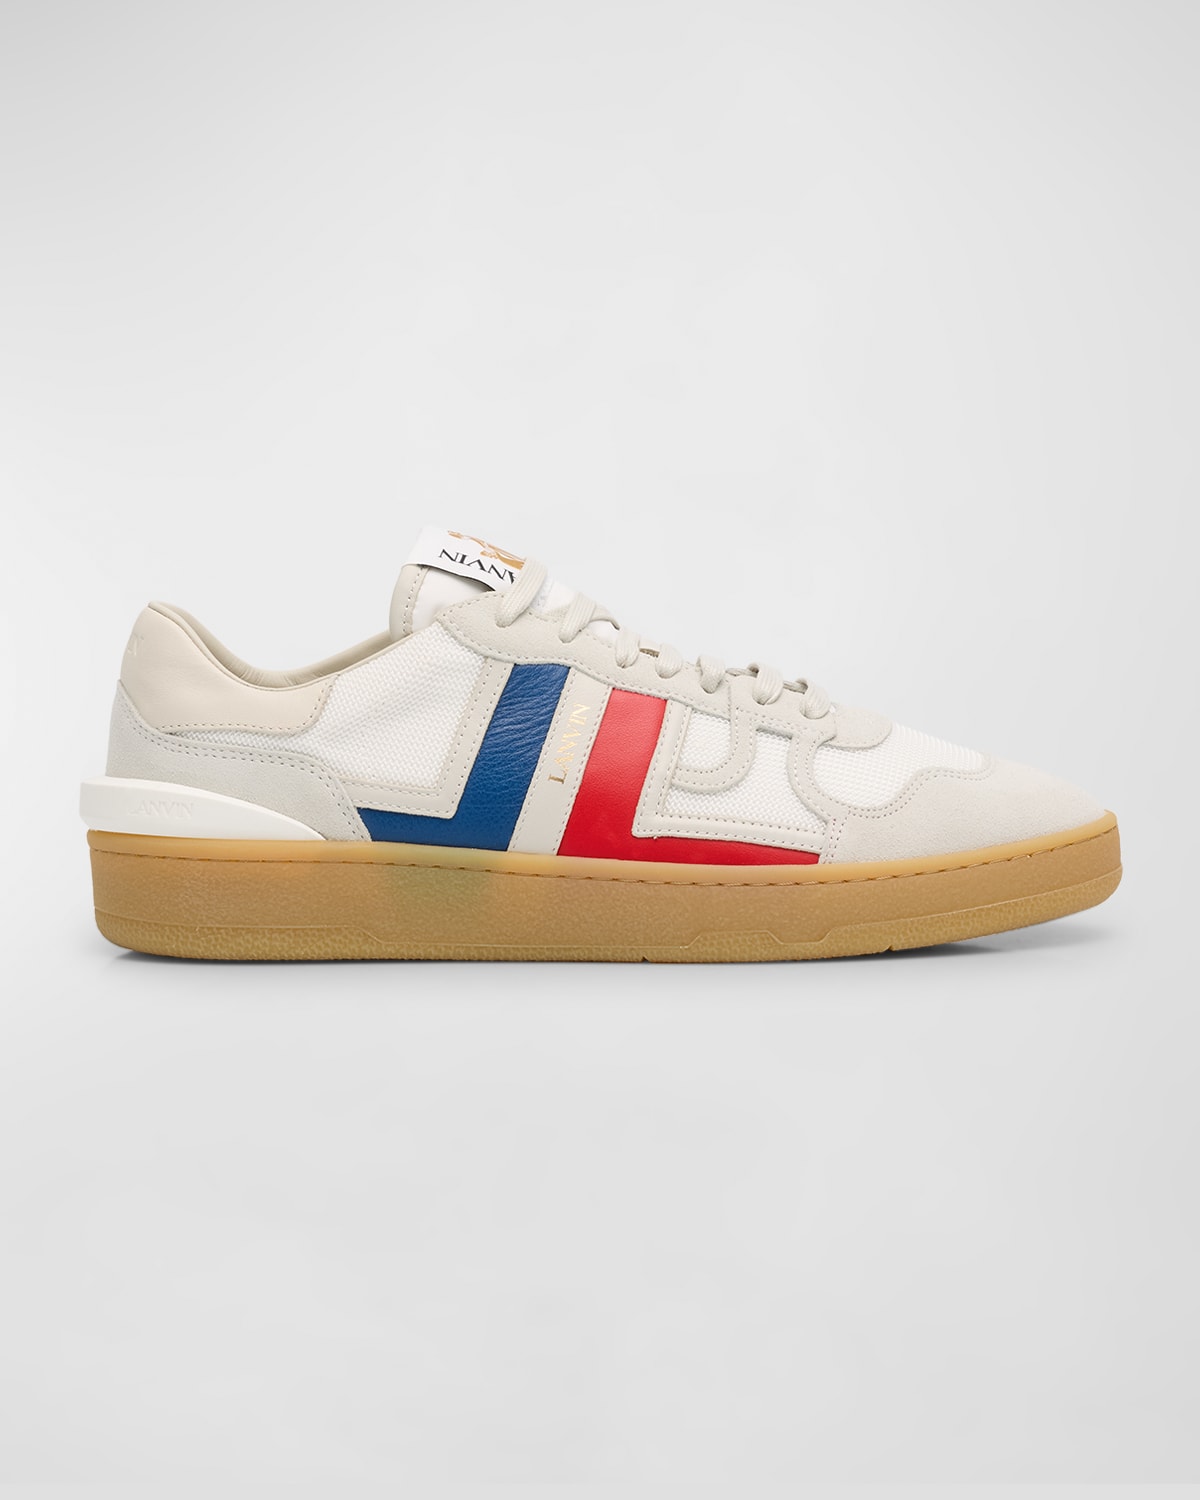 Lanvin Men's Clay Textile And Leather Low-top Sneakers In White/blue/red